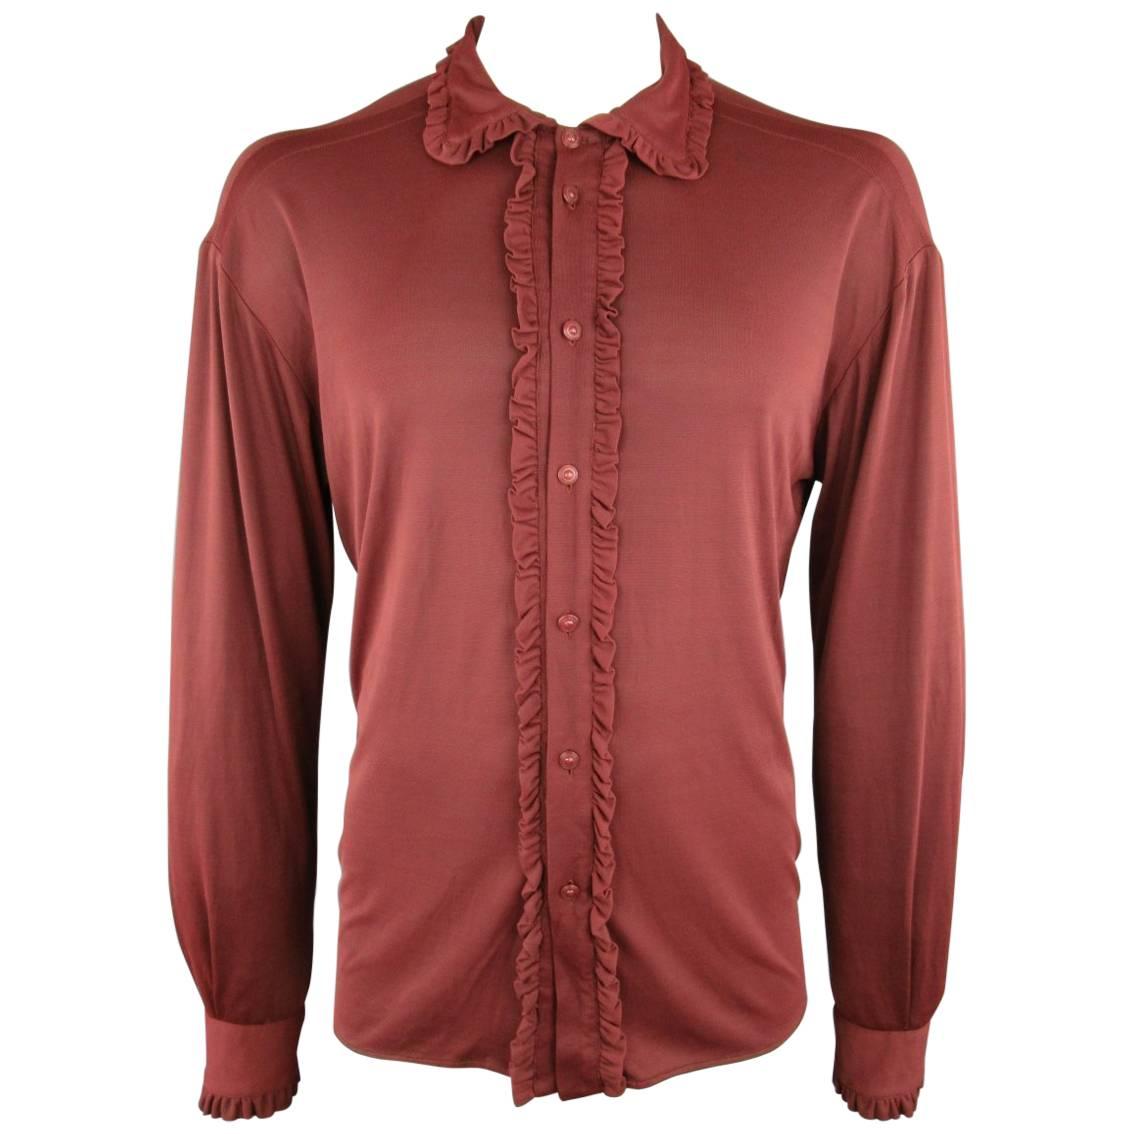 VERSUS by GIANNI VERSACE Size L Maroon Polimide Ruffle Trim Long Sleeve Shirt